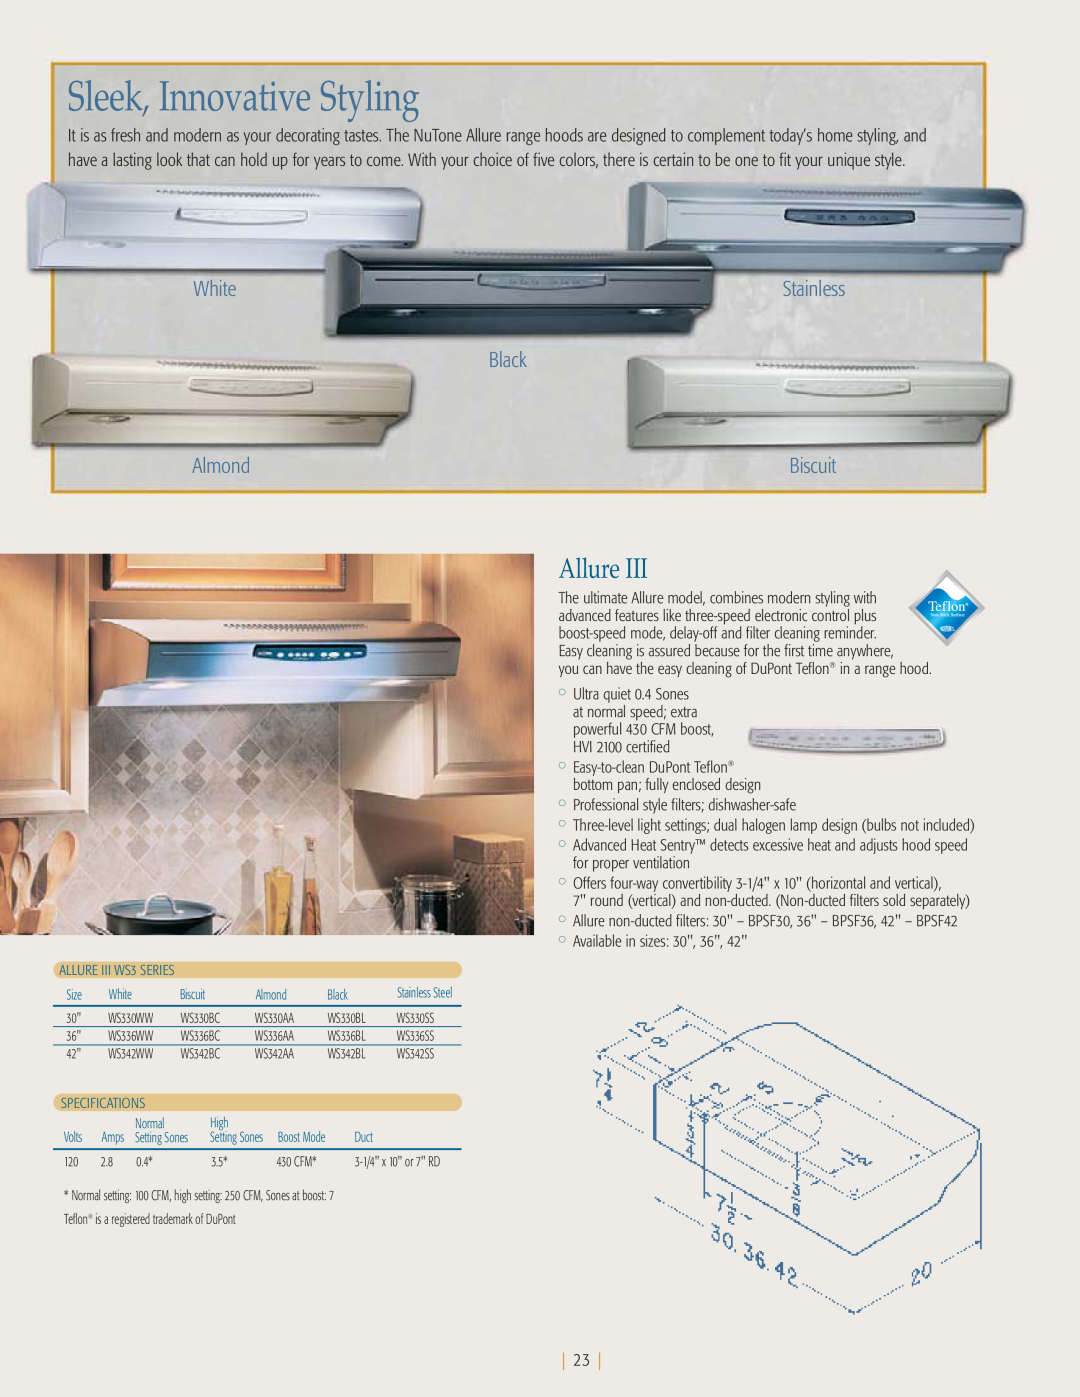 NuTone kitchen ventilation manual Sleek, Innovative Styling, Allure, White, Black, Almond, Stainless, Biscuit 